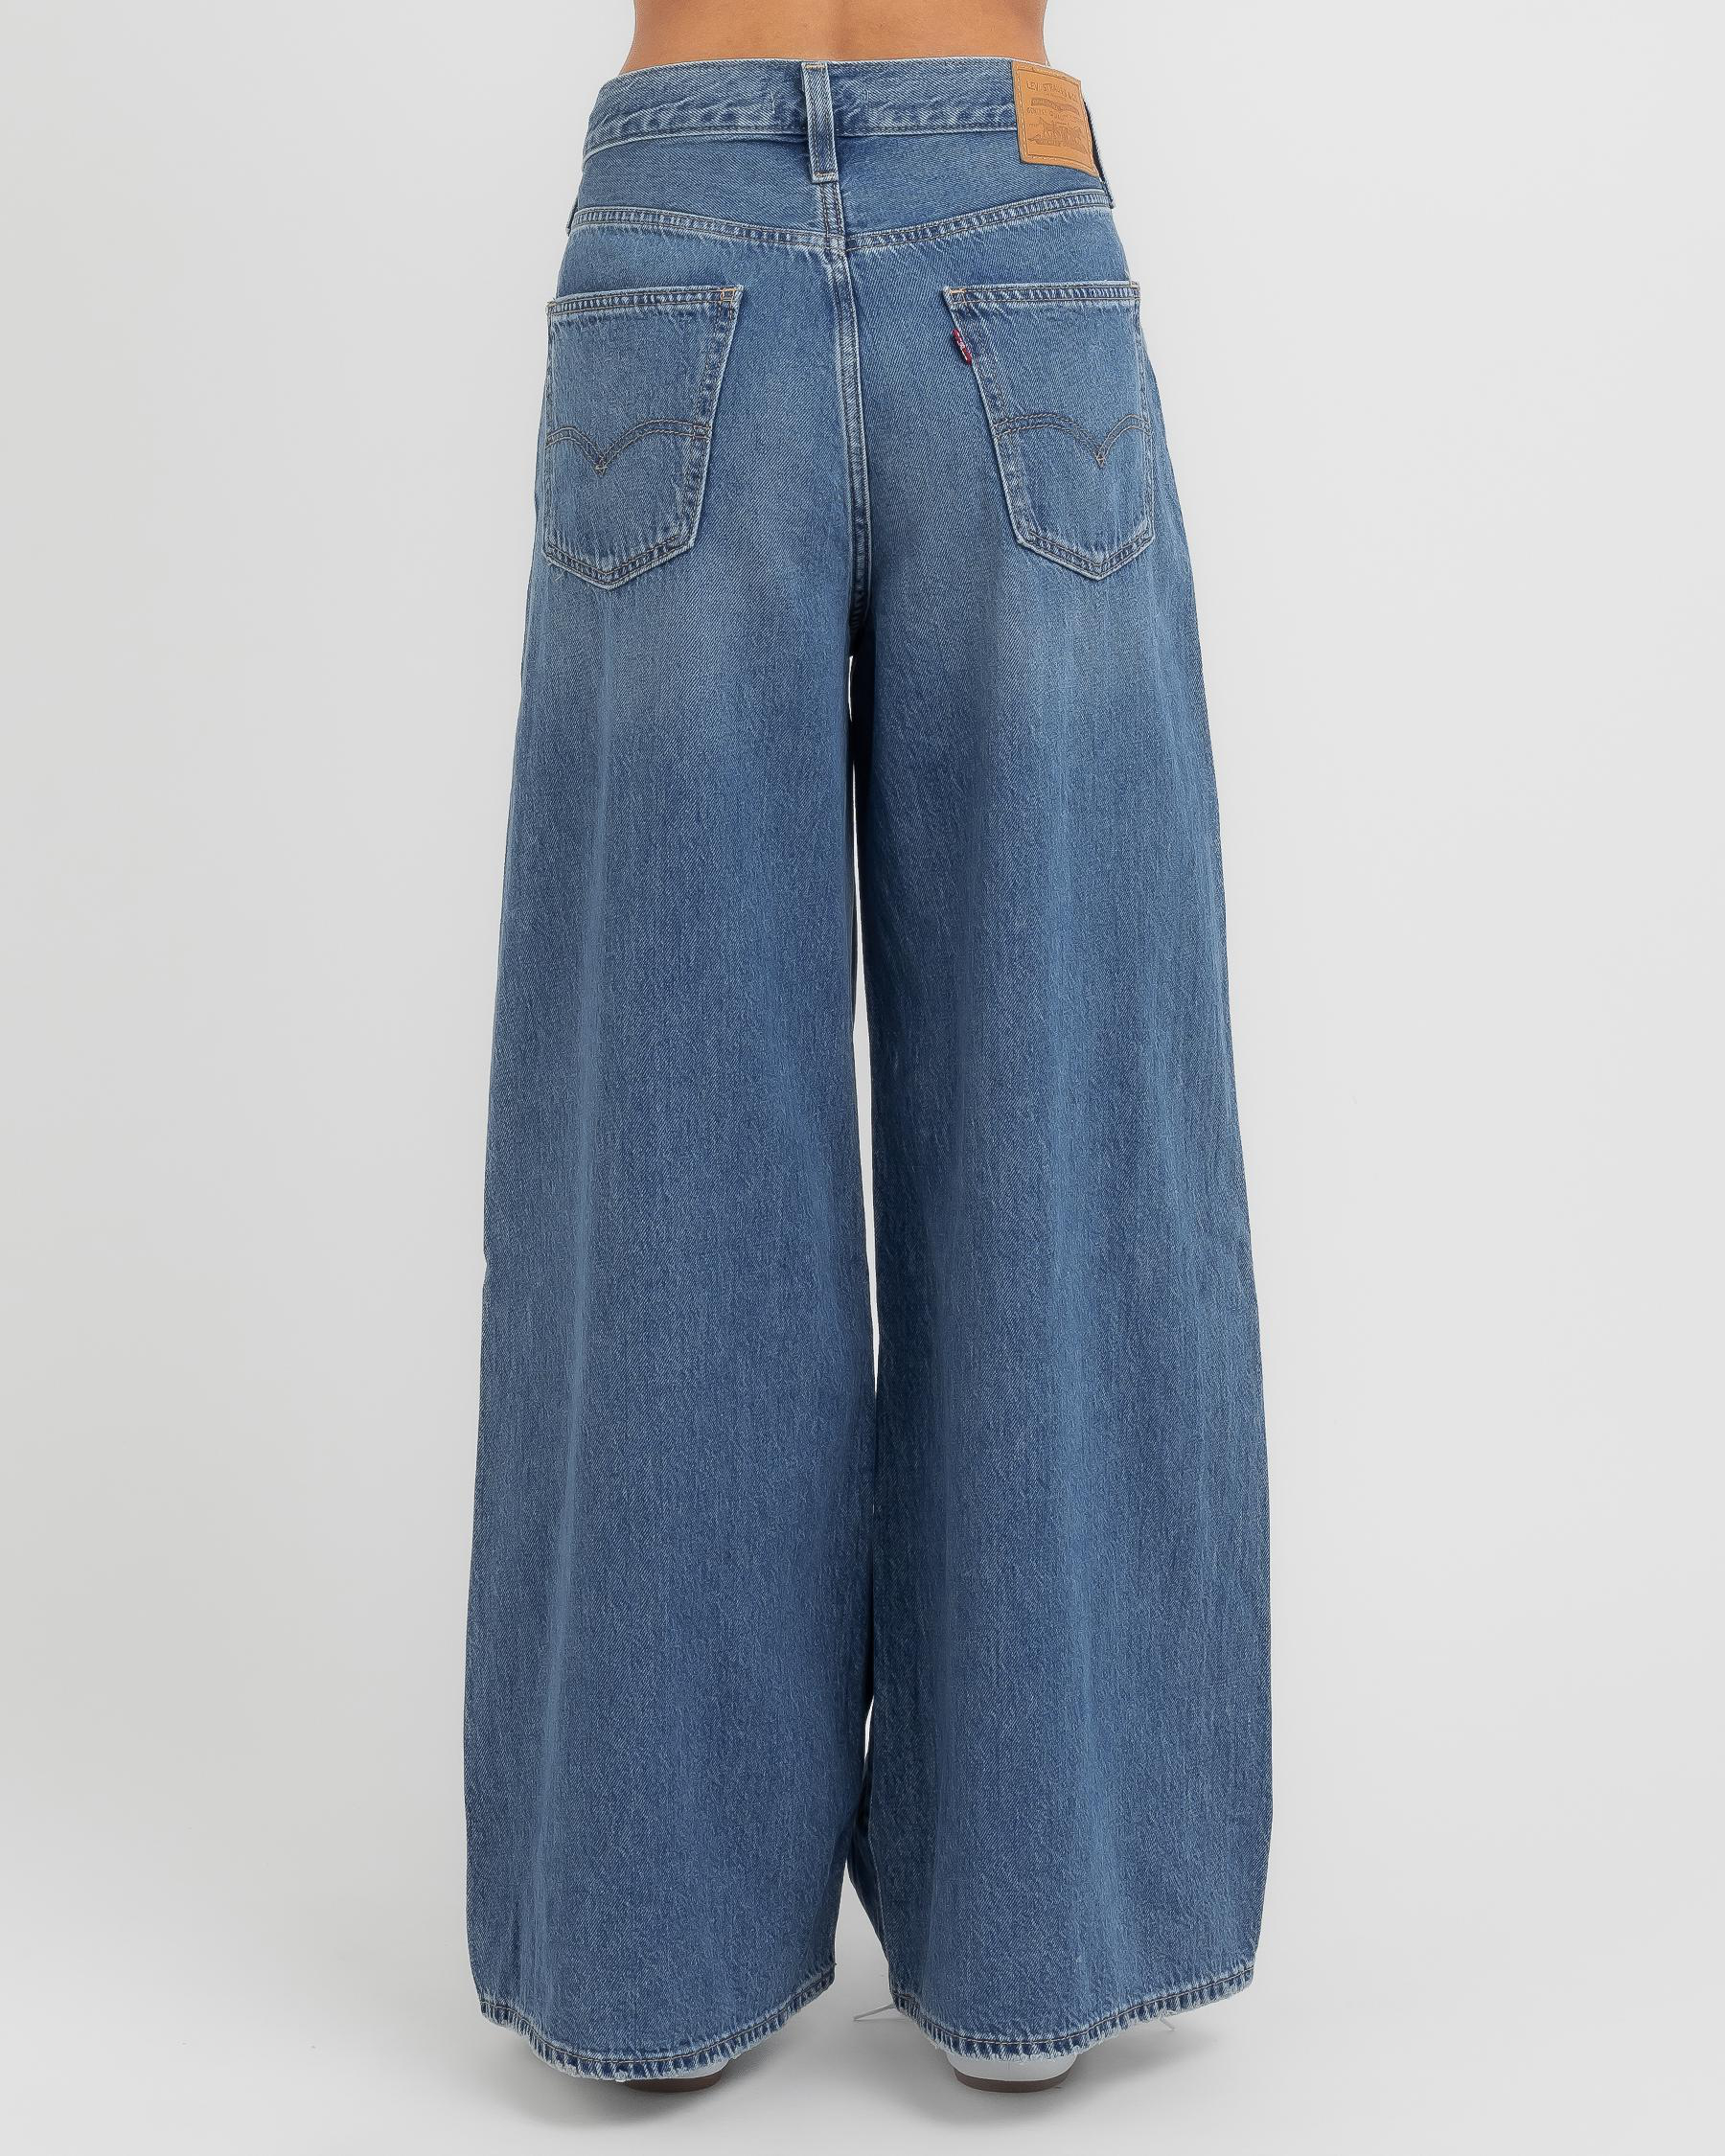 Levi's XL Flood Jeans In Know It All - Fast Shipping & Easy Returns ...